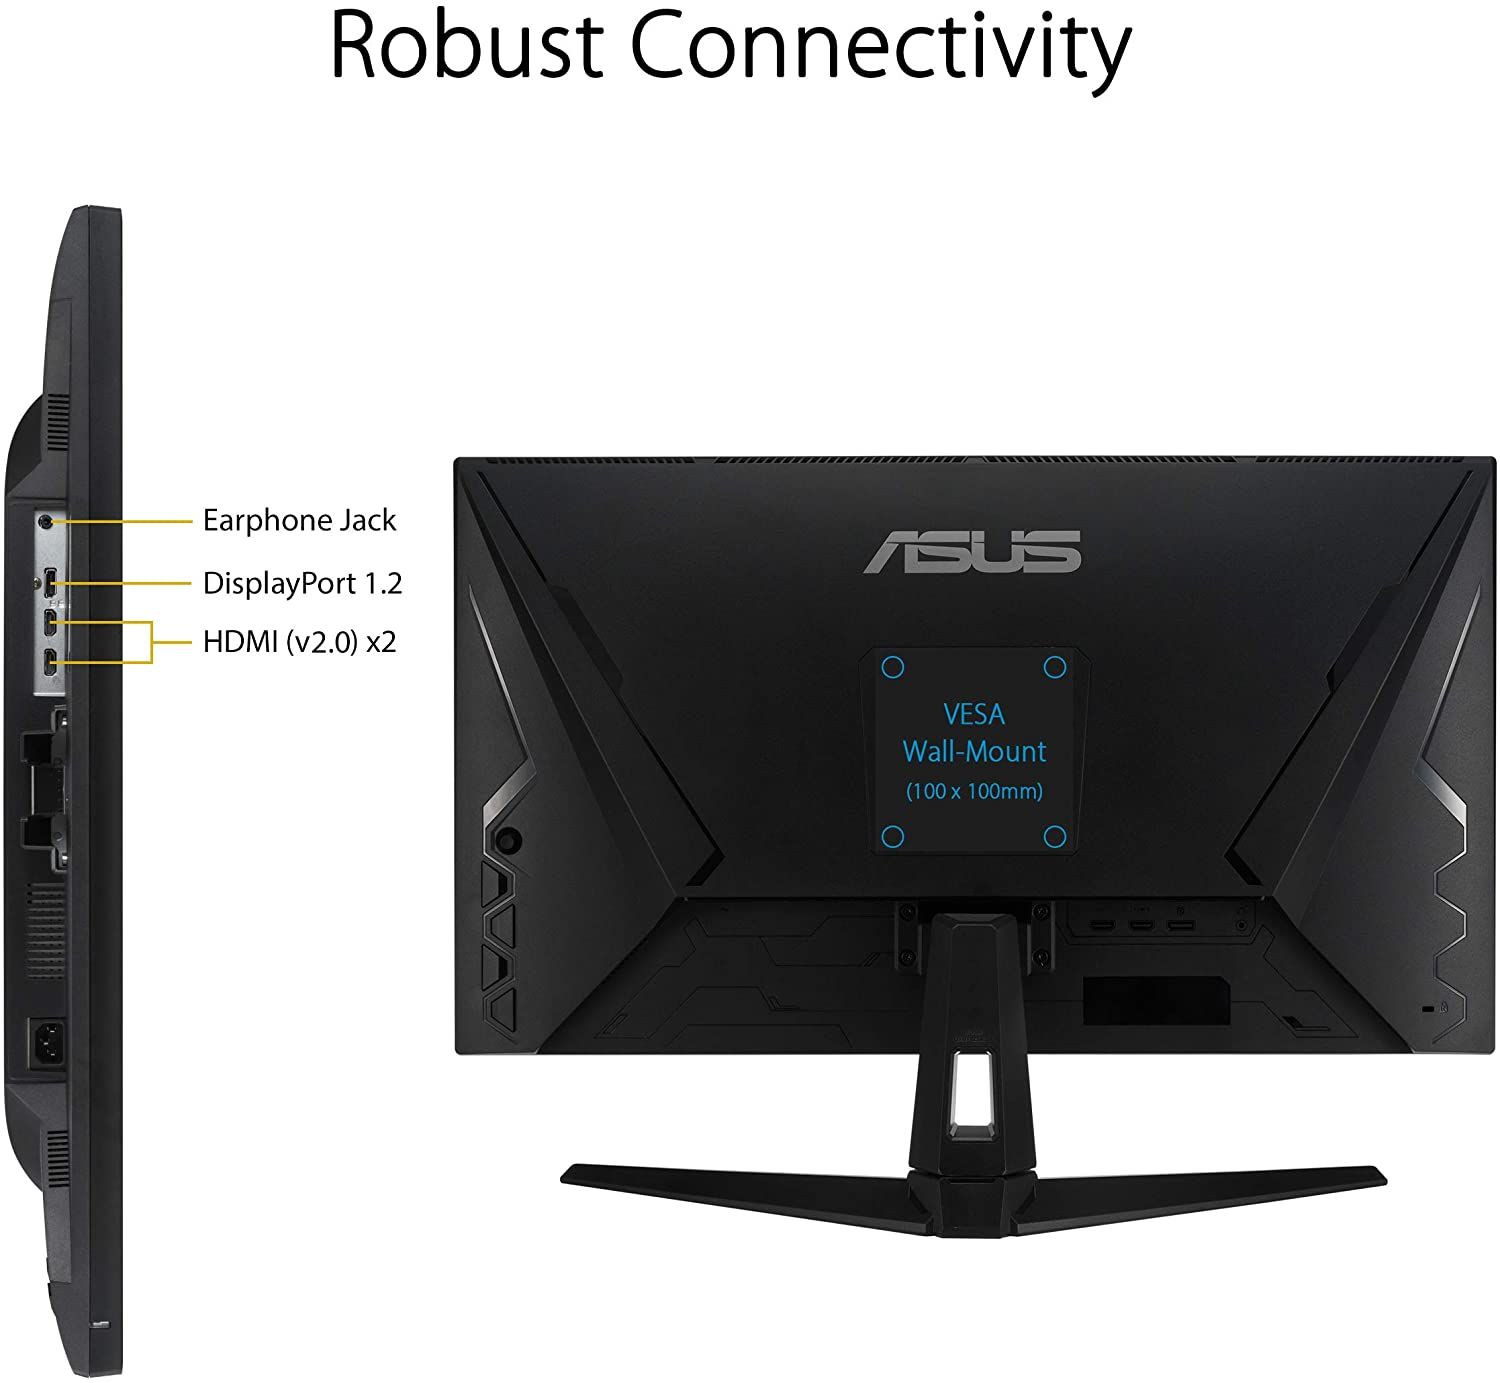 ASUS TUF Gaming VG289Q1A connectivity